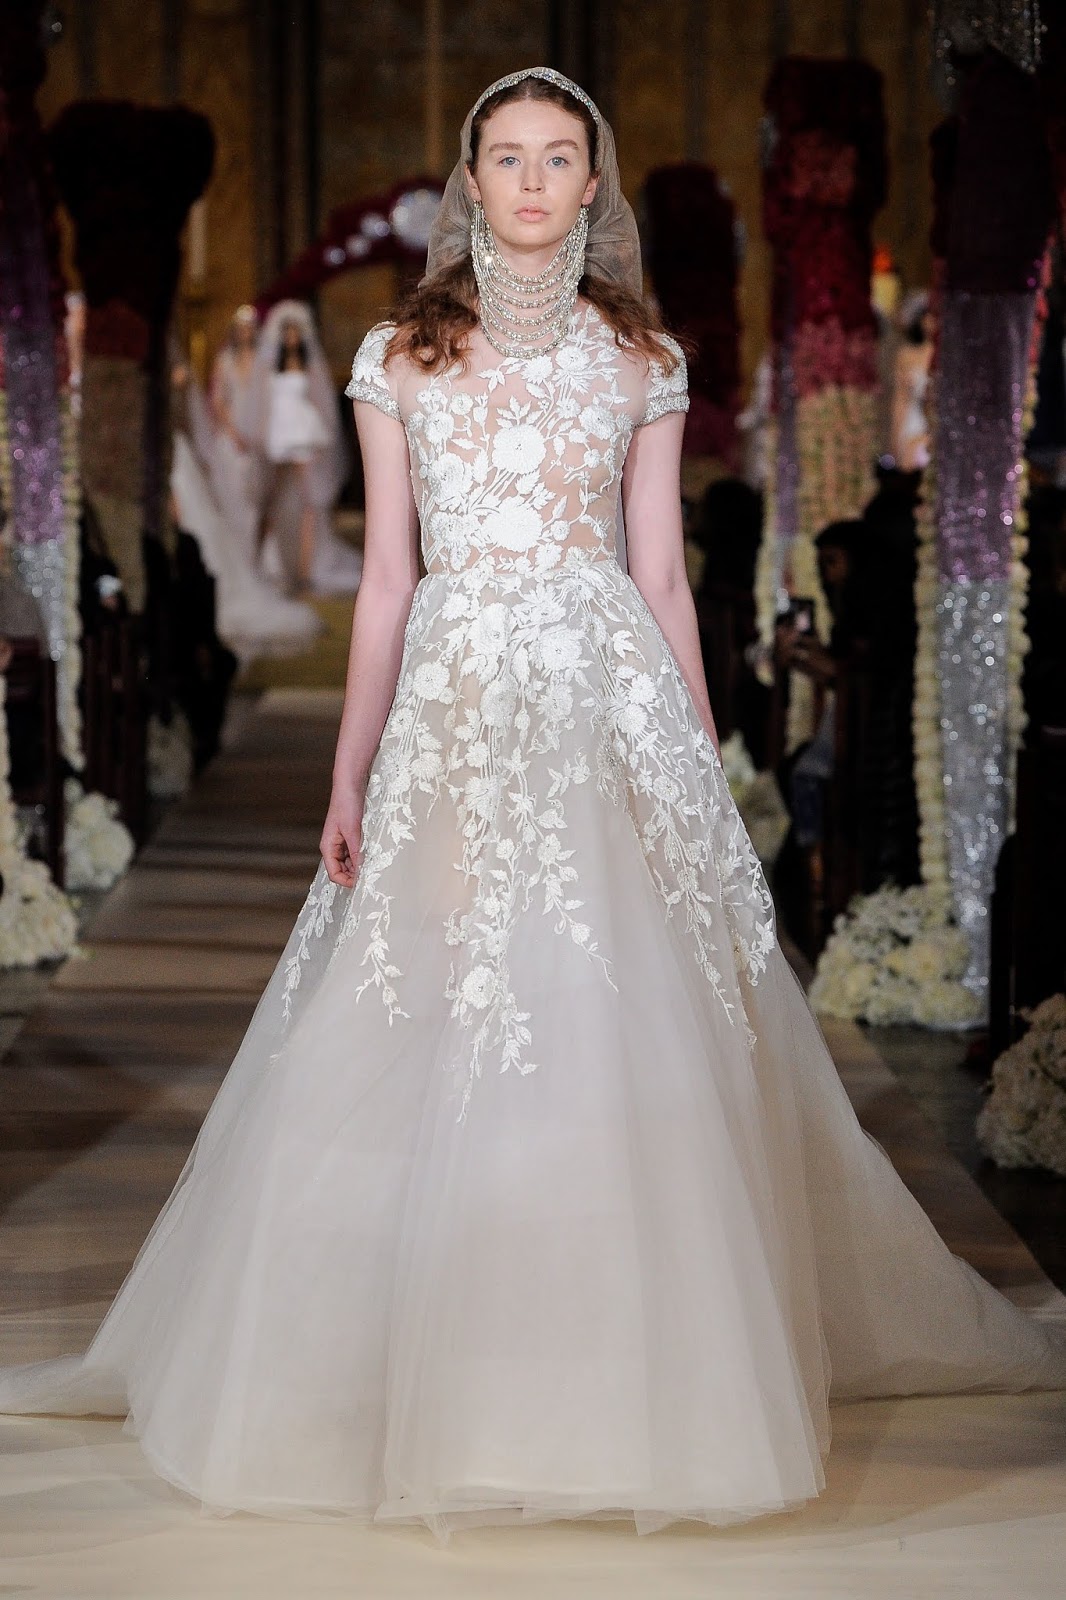 Bridal Beauty by Reem Acra August 1, 2019 | ZsaZsa Bellagio - Like No Other